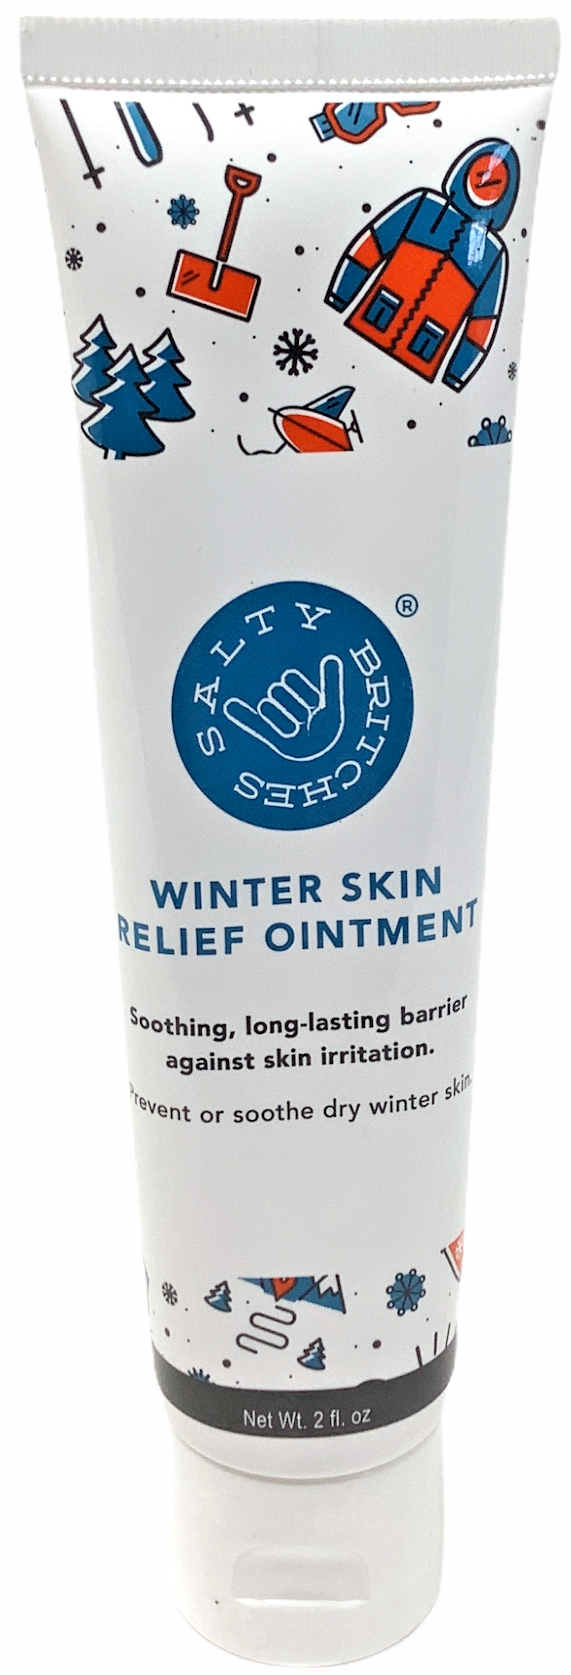 Winter Skin Relief Ointment 2oz.